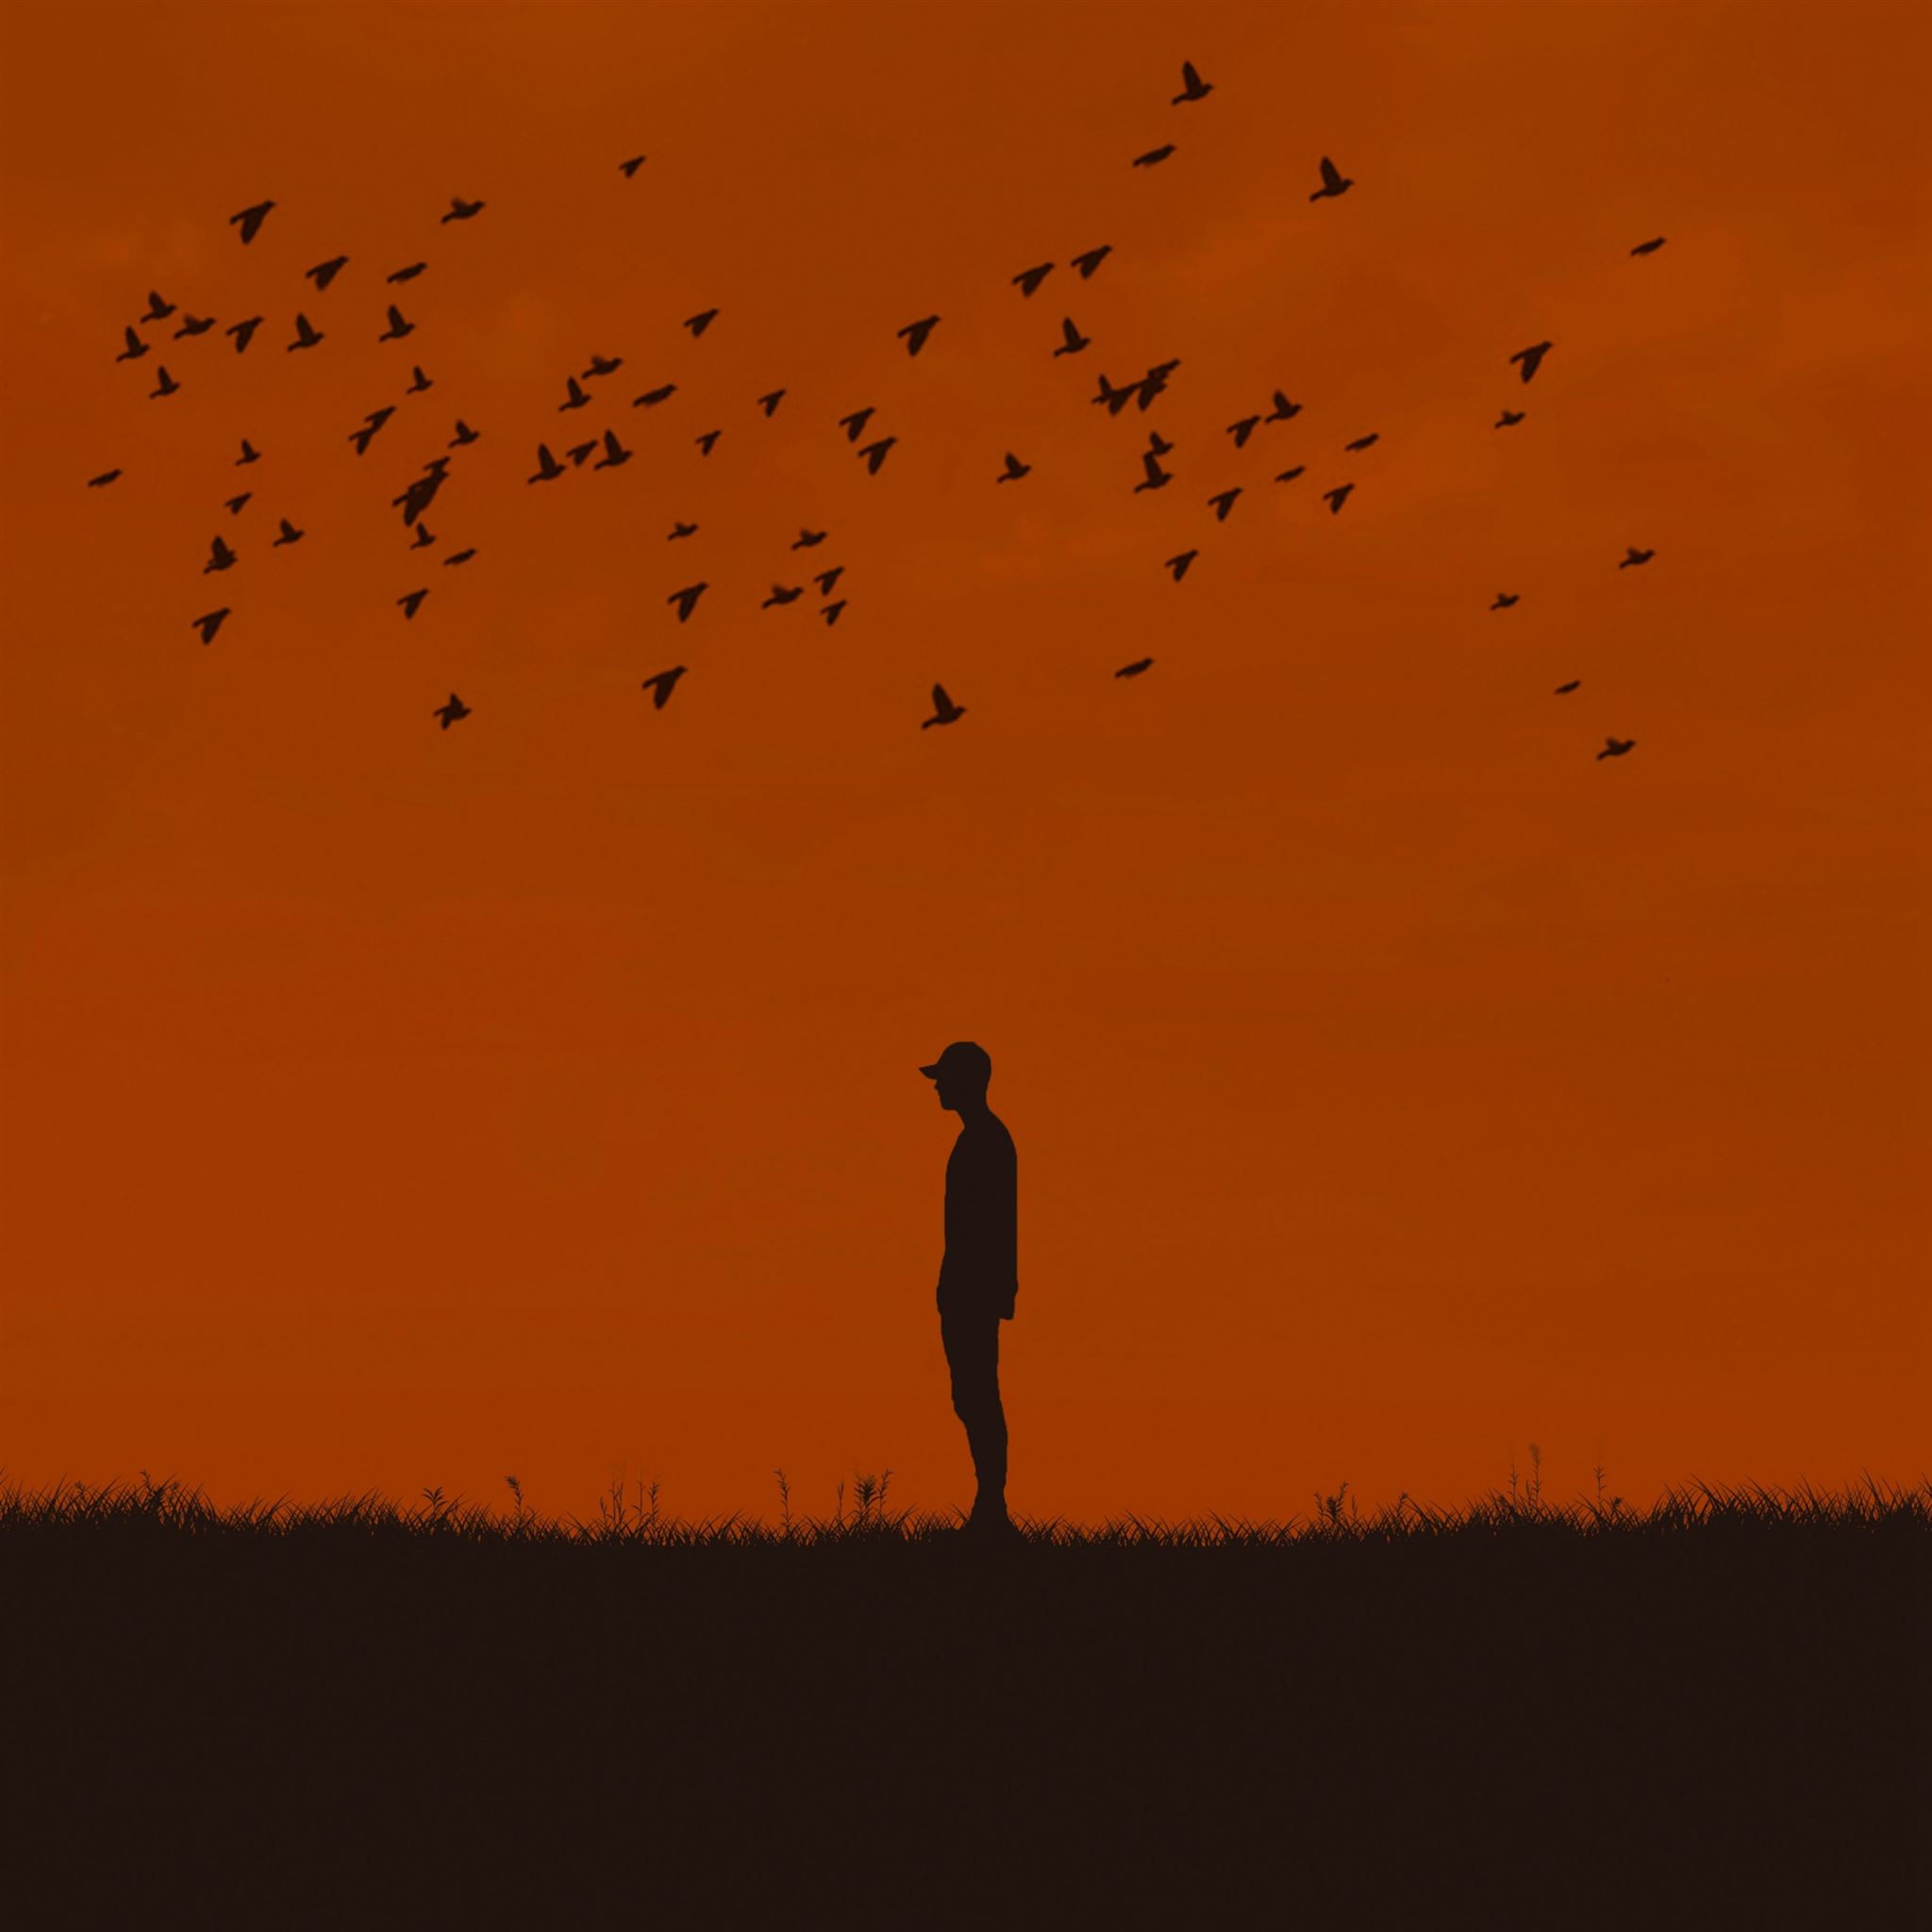 lonely person wallpaper